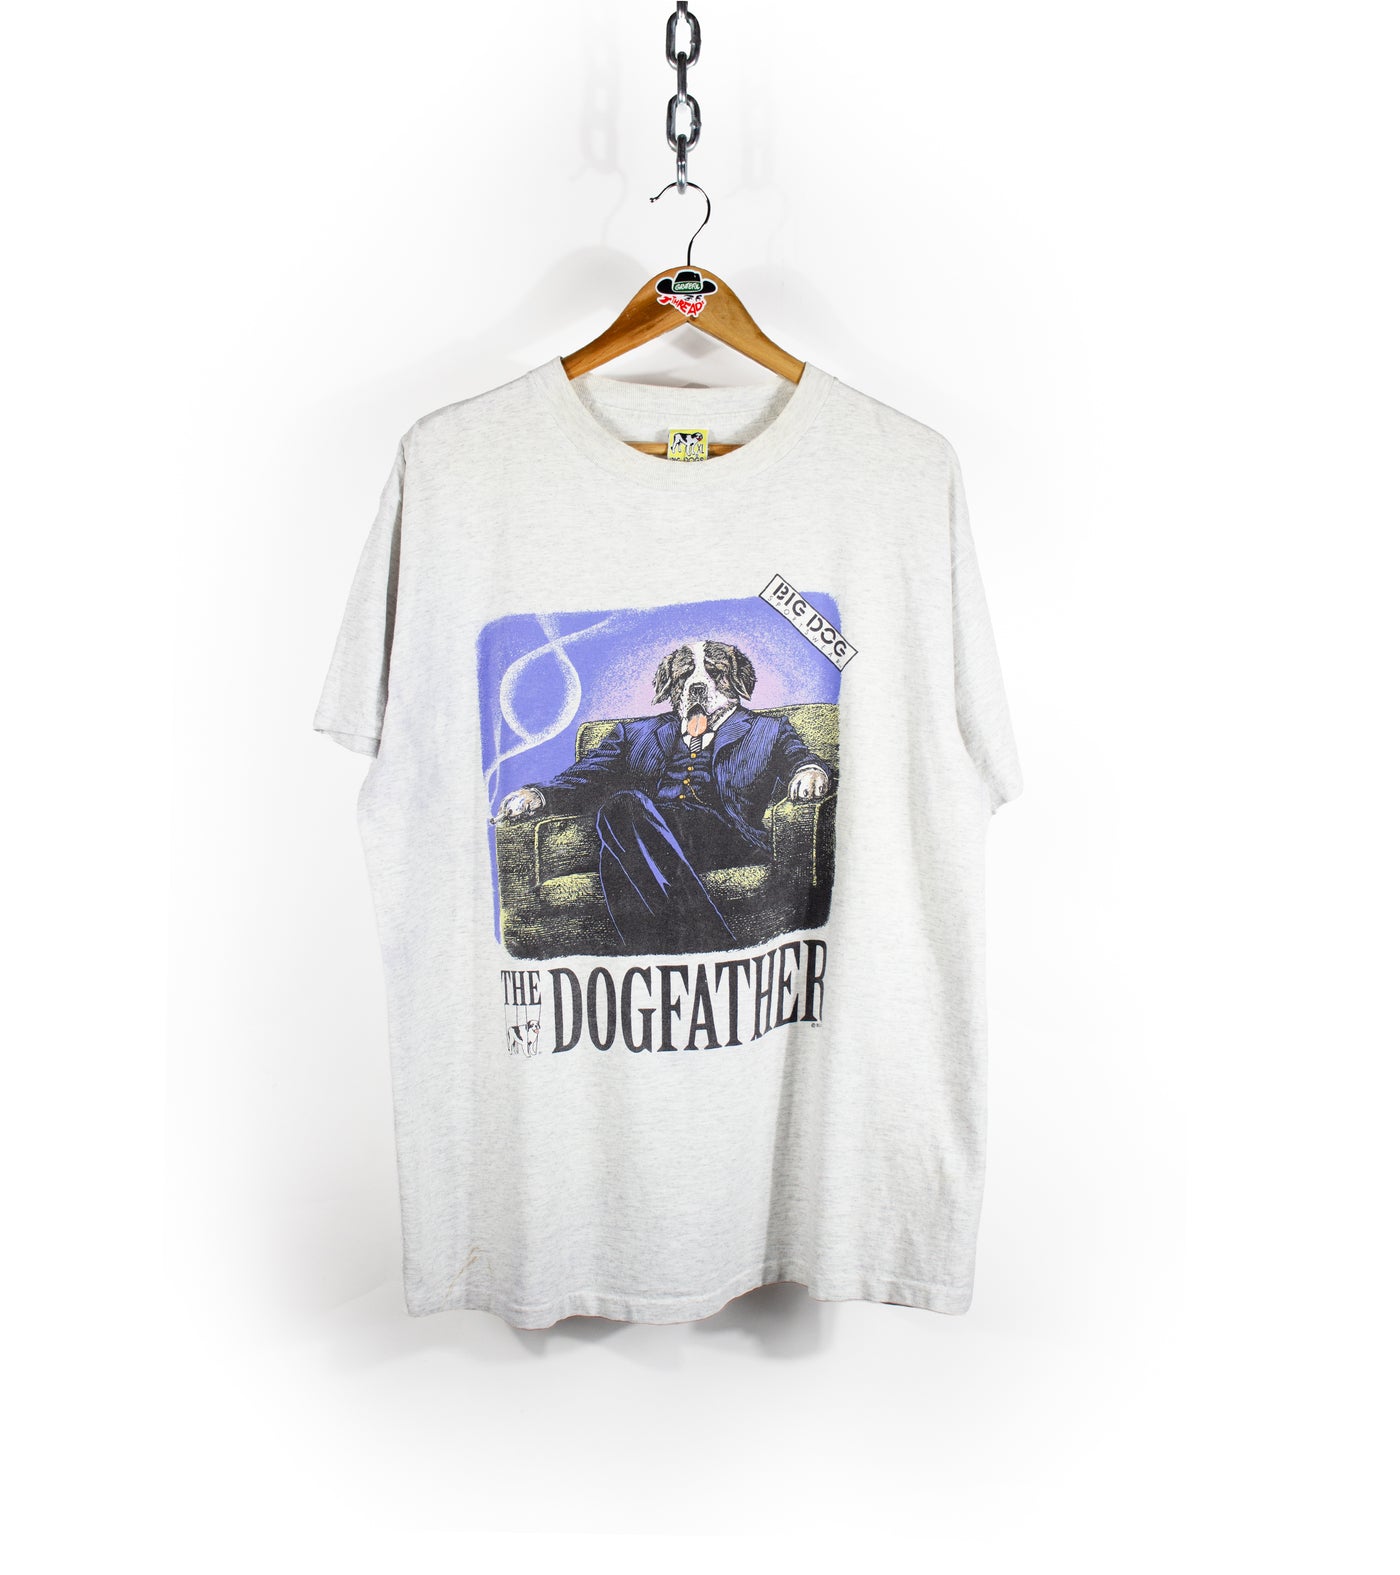 Vintage 90s Big Dogs 'The Dogfather' T-Shirt